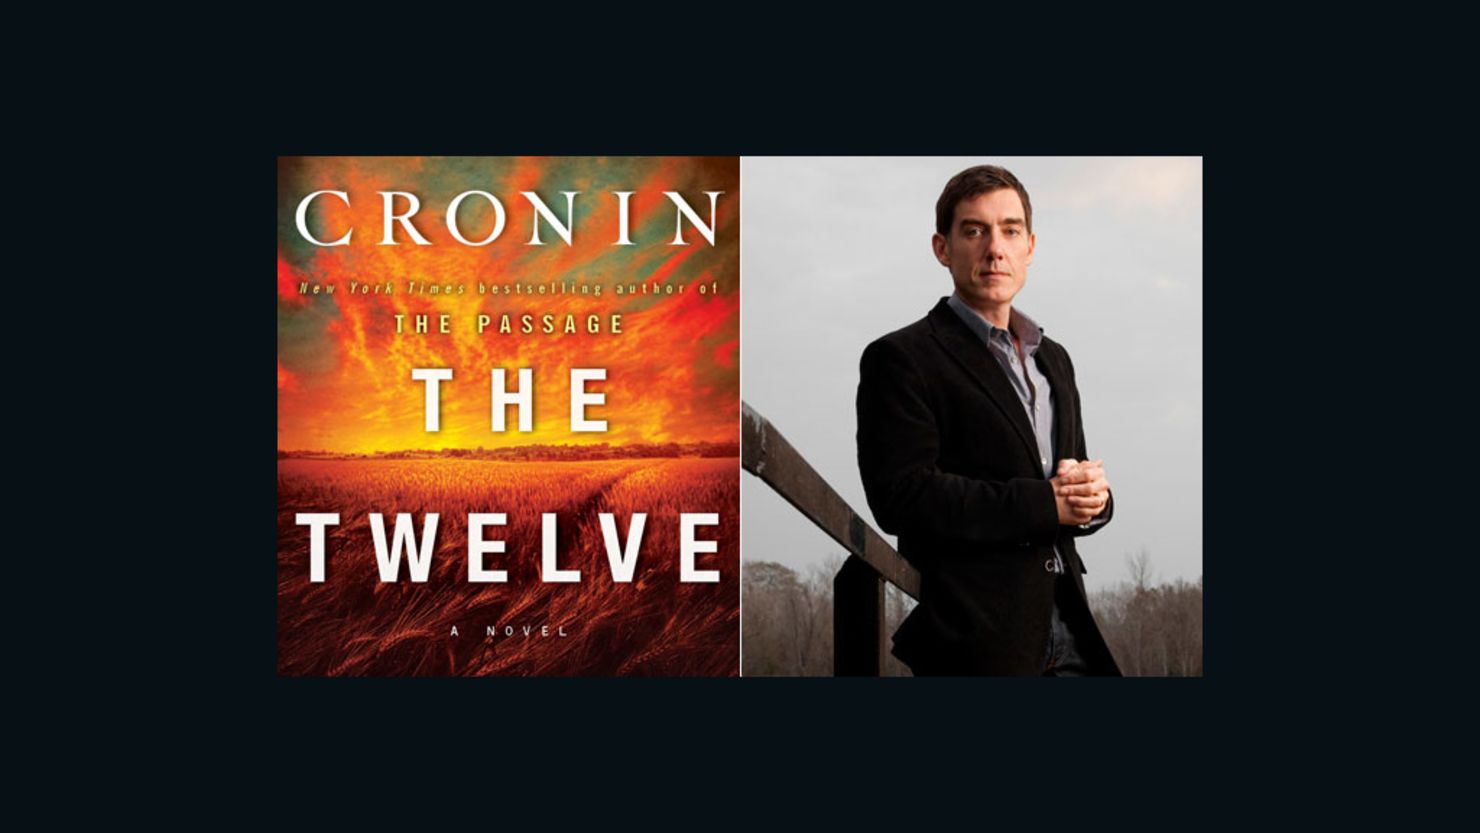 "The Twelve" is the second book in Justin Cronin's apocalyptic trilogy.